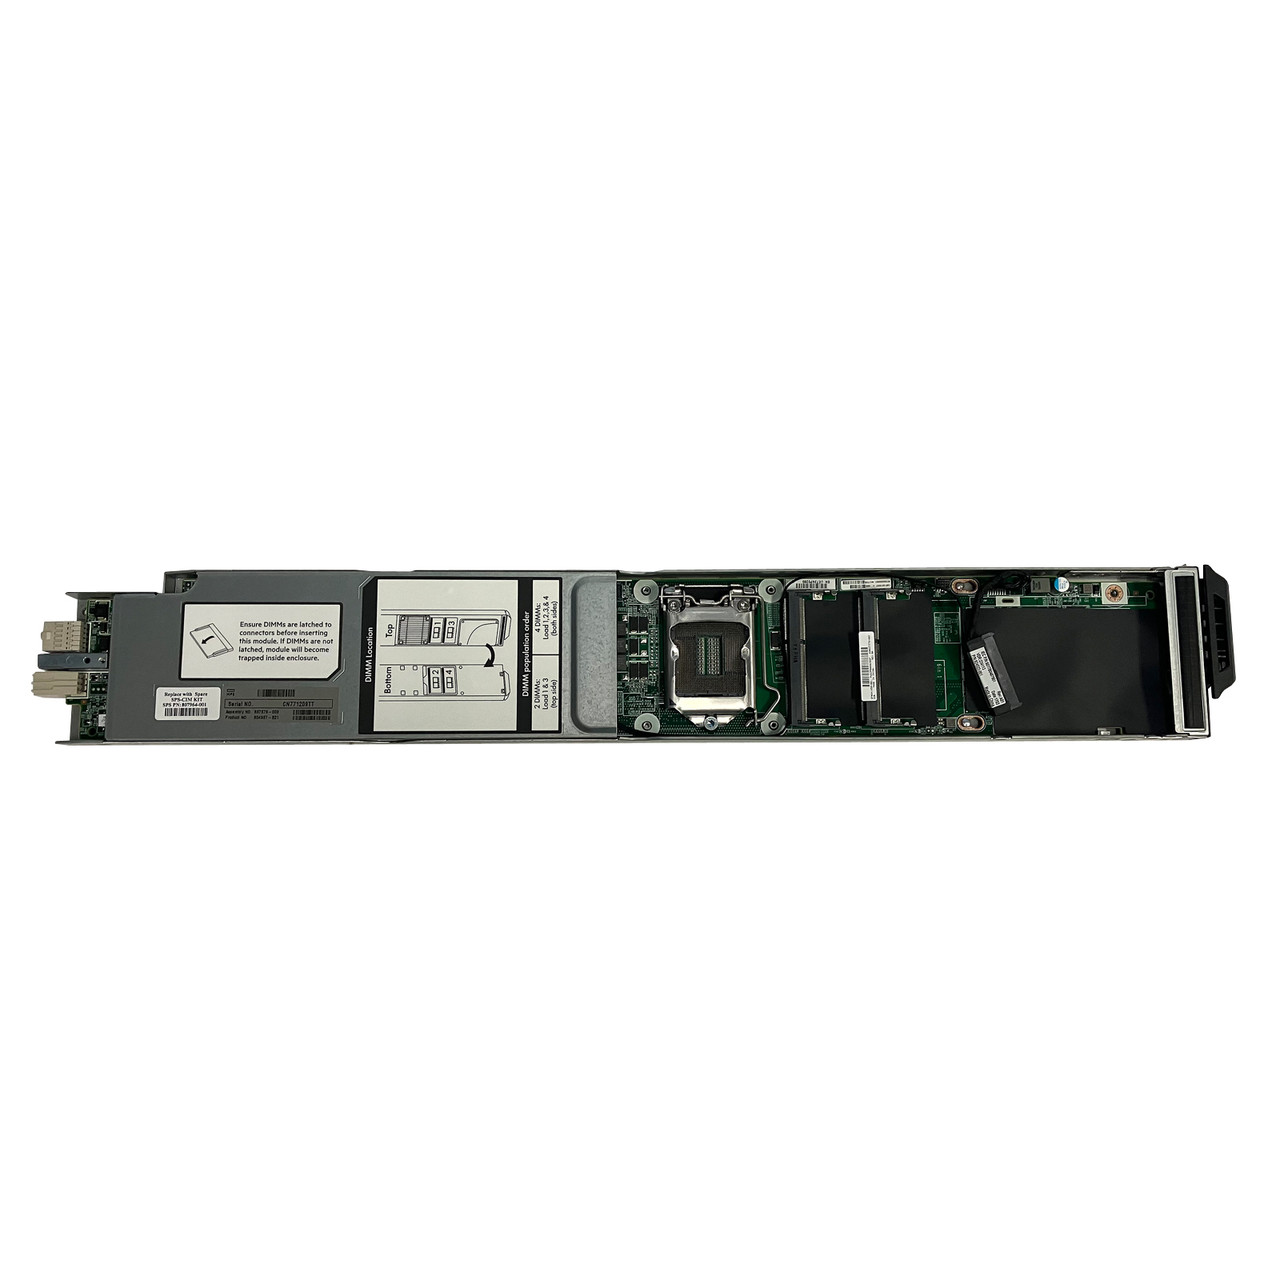 HP 841450-001 Synergy TAA CI Manager Module 1M1 board 837378-003